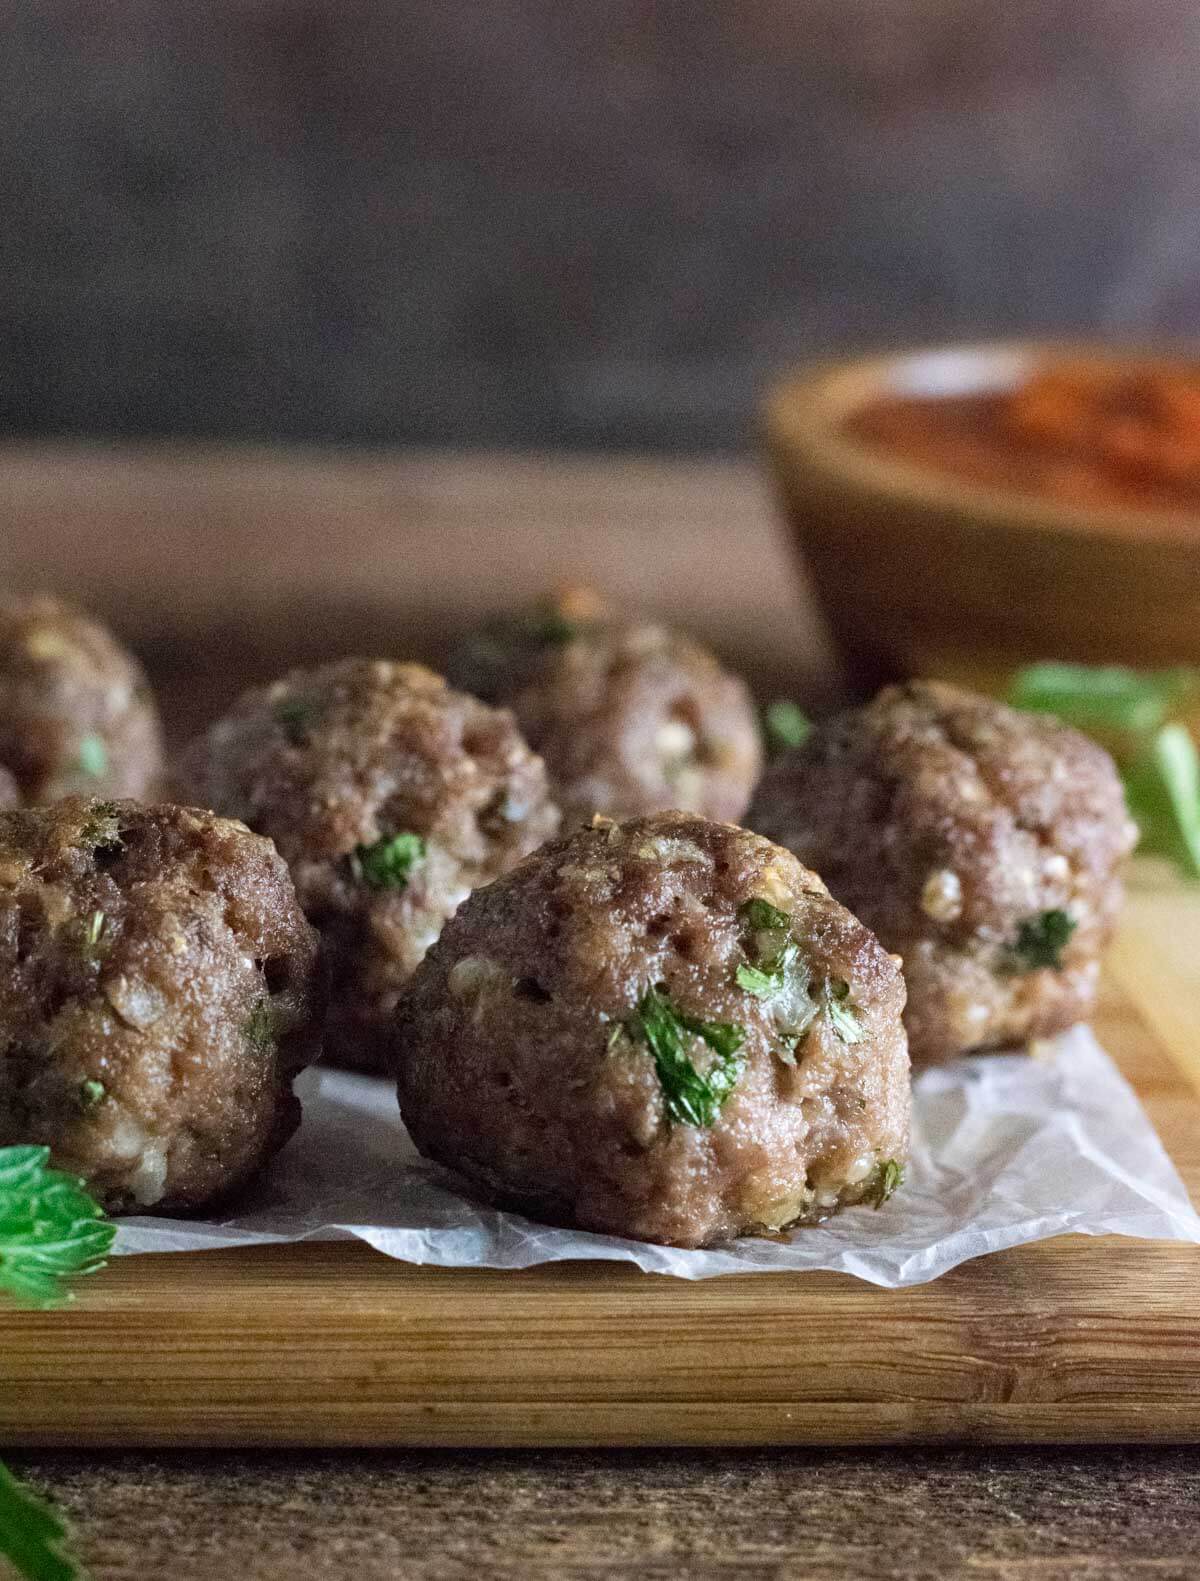 Meatballs without eggs.